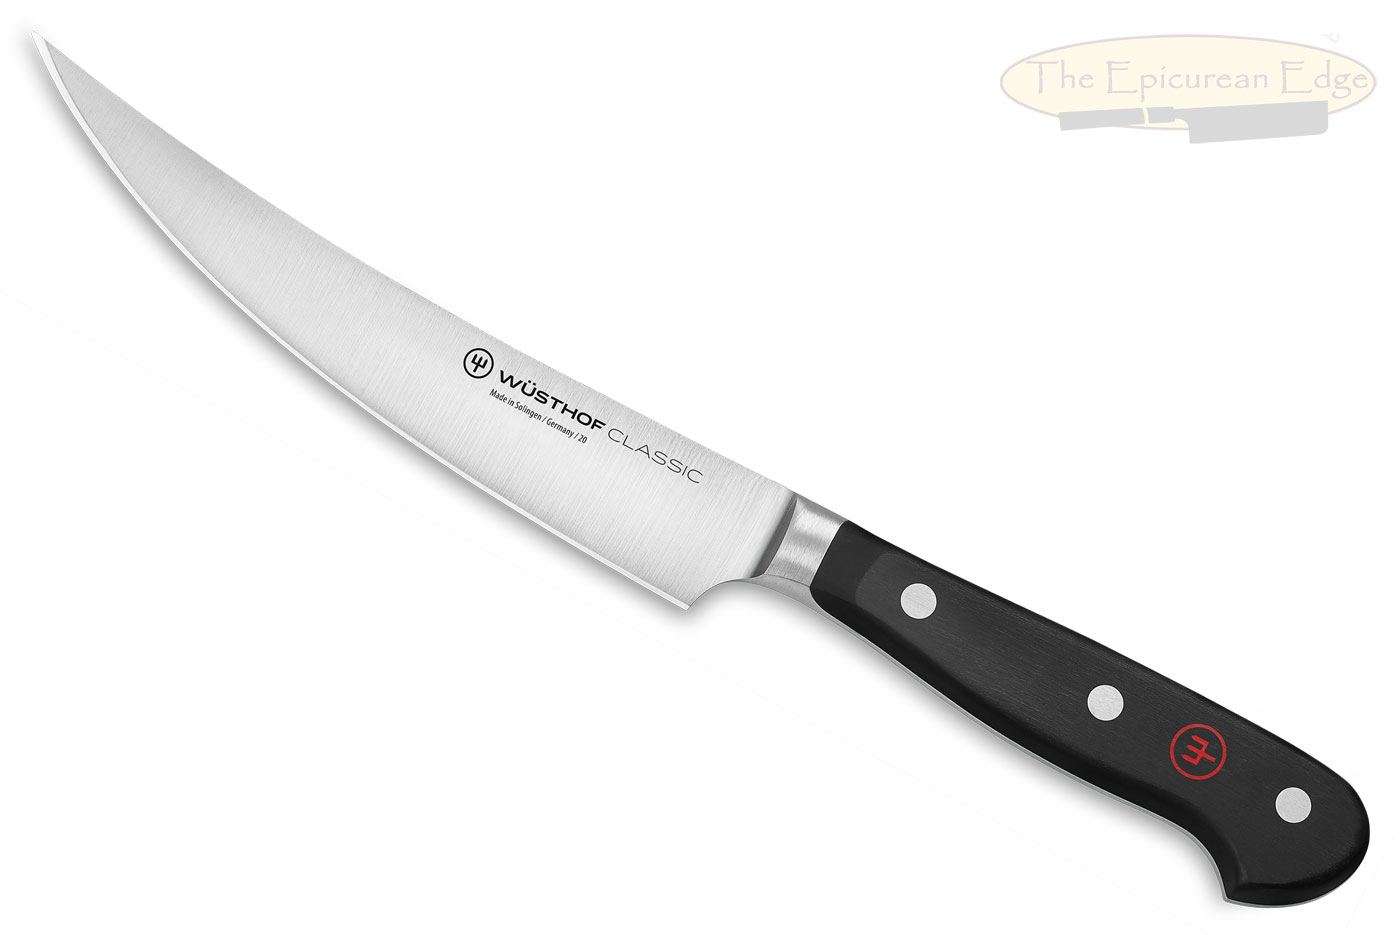 Wusthof-Trident Classic Curved Boning Knife - 6 in. (1040134516)